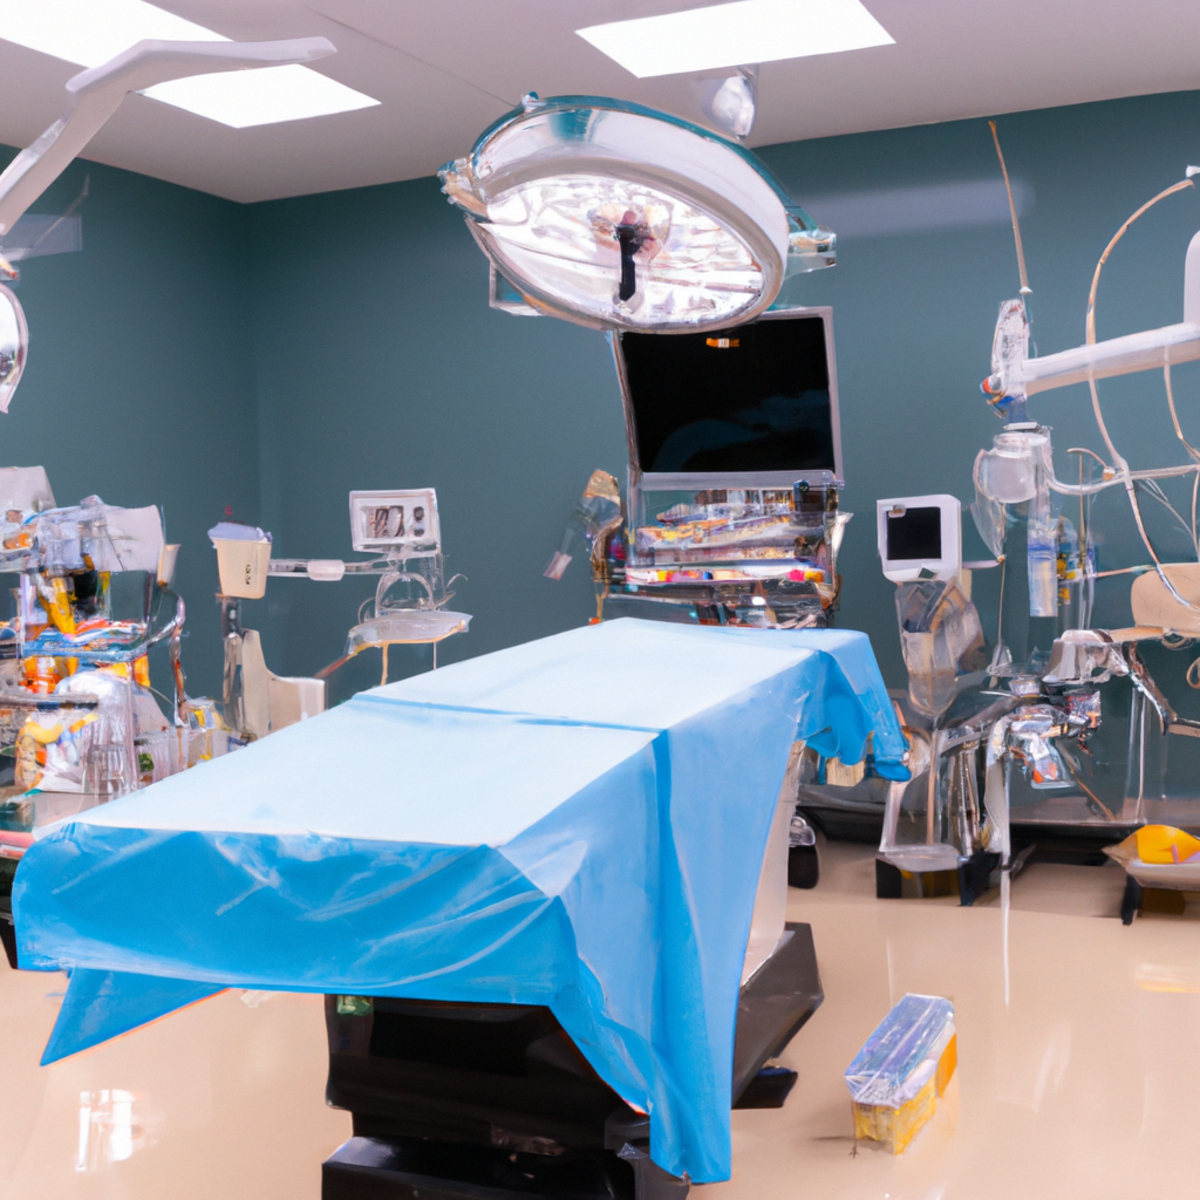 Hospital room with surgical table, instruments, and bright light, symbolizing medical procedures for gallbladder carcinoid tumor.